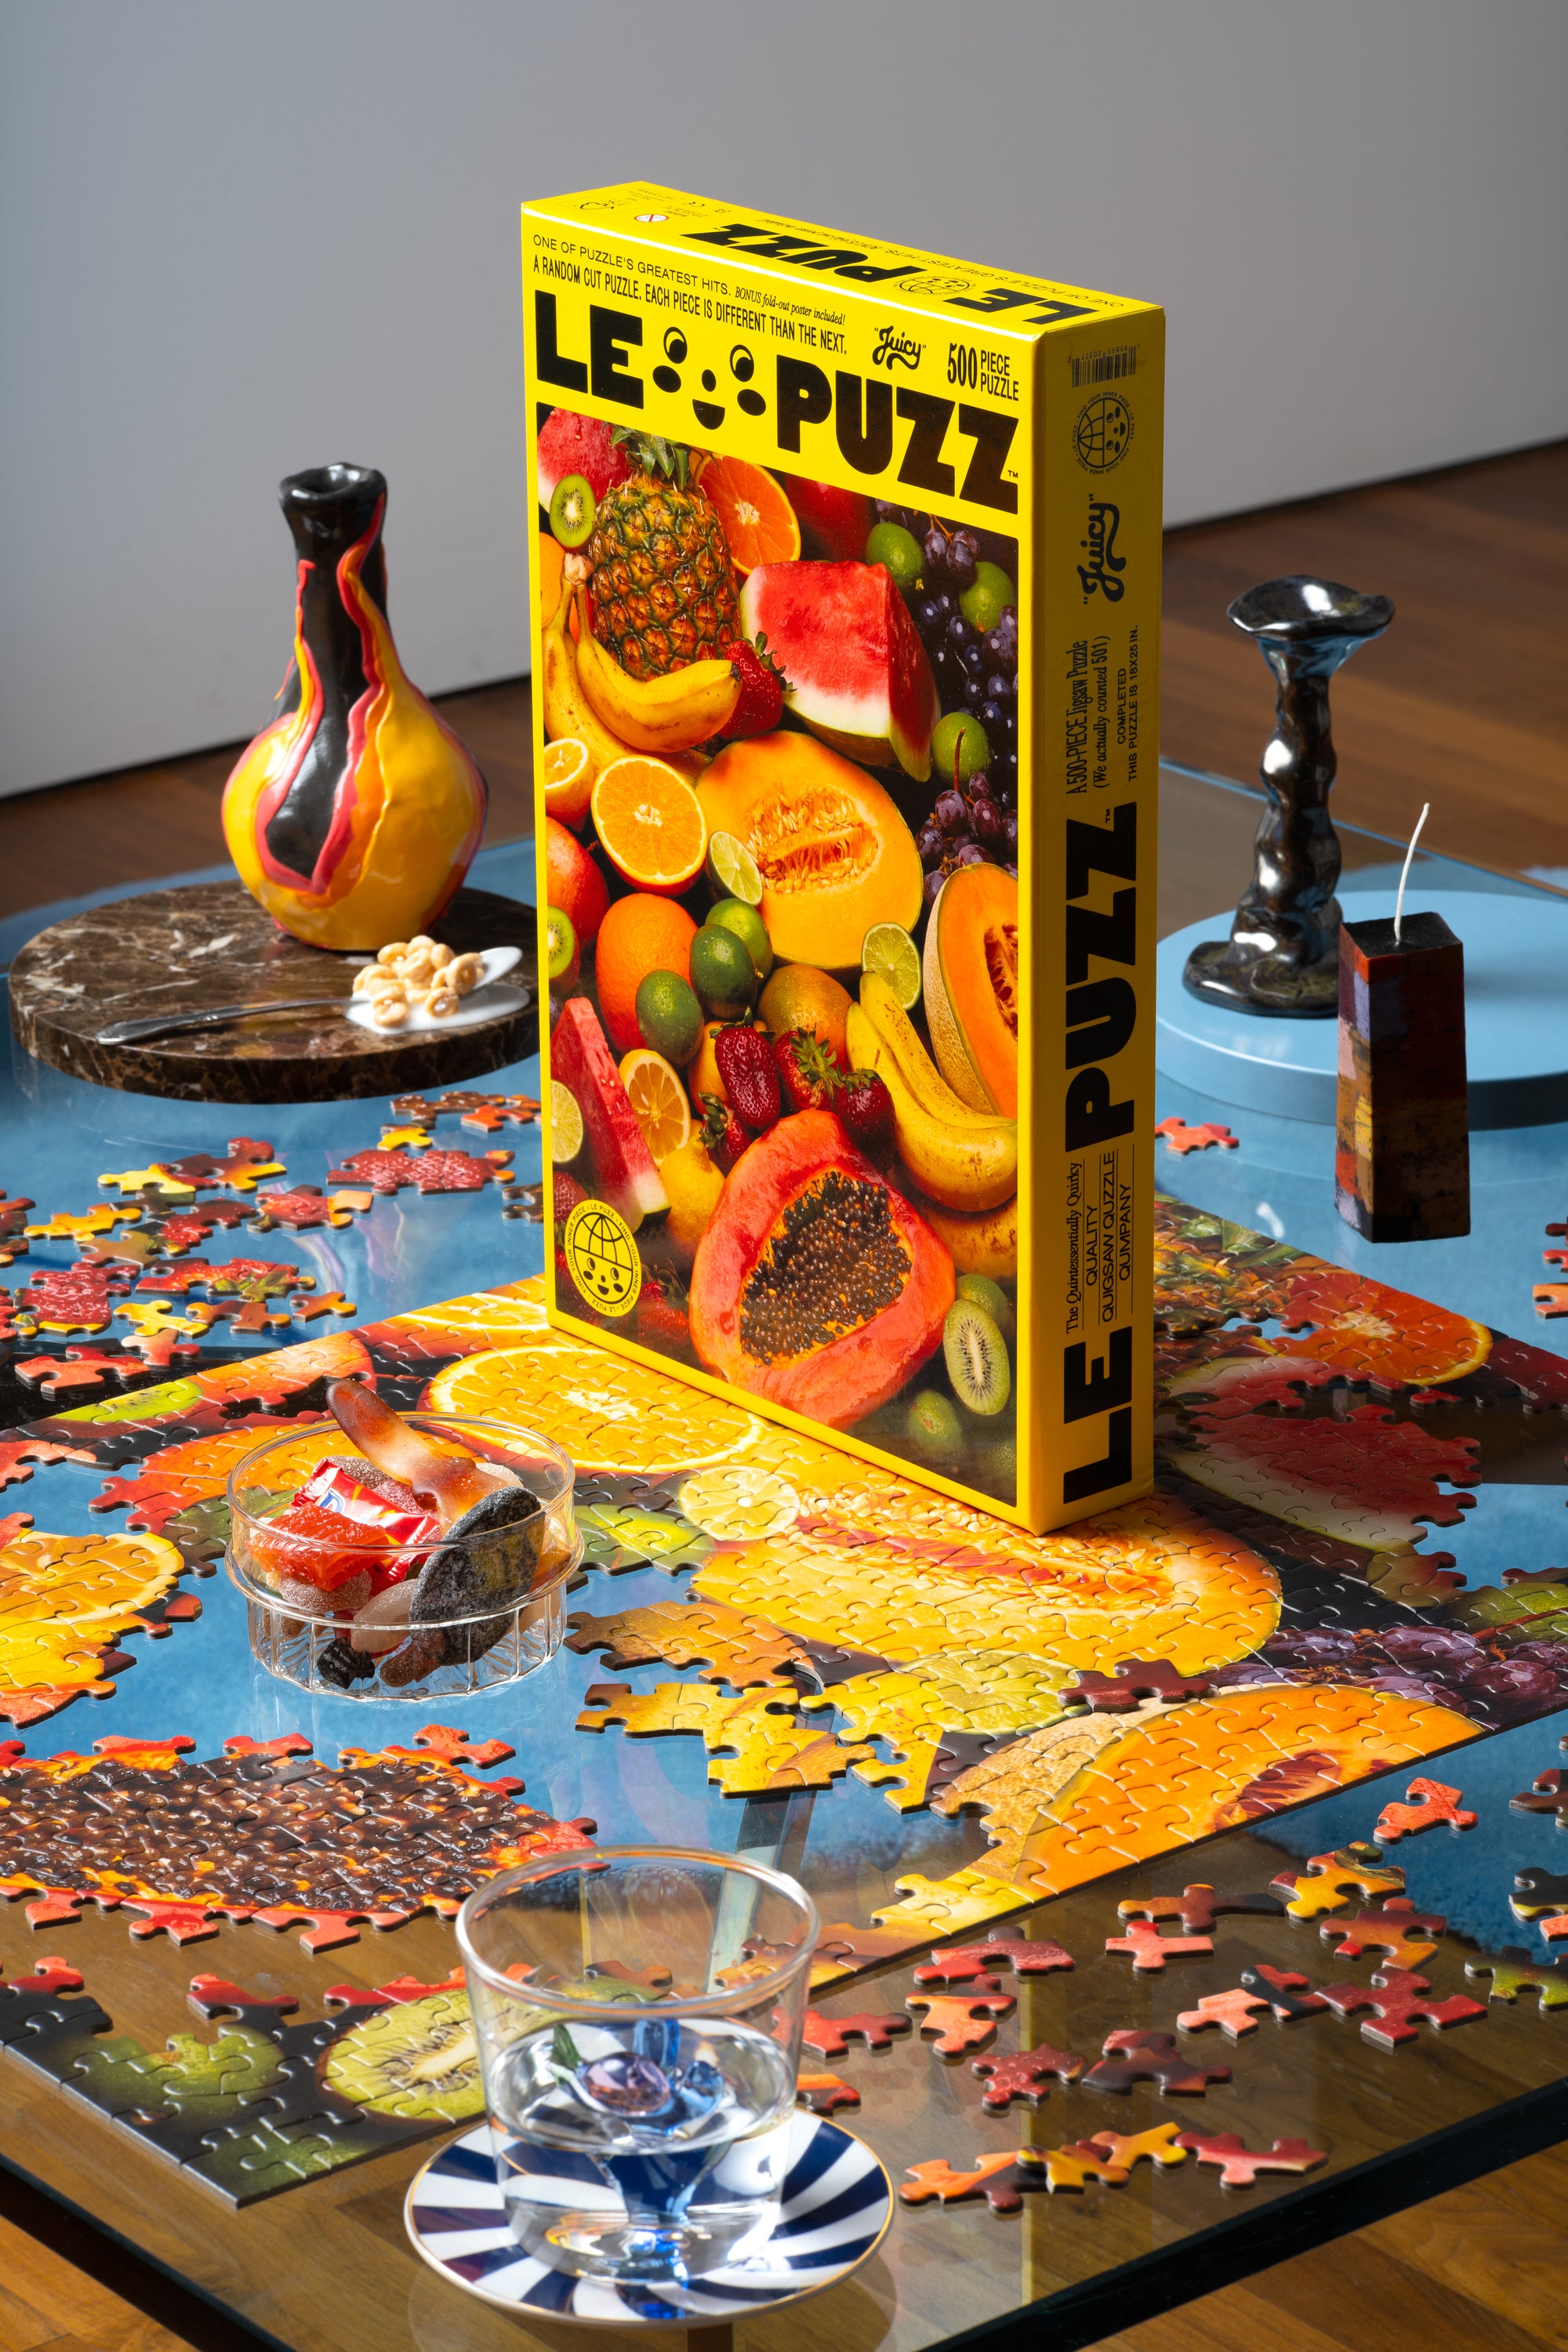 Hot Dog  a 500 piece puzzle from Le Puzz